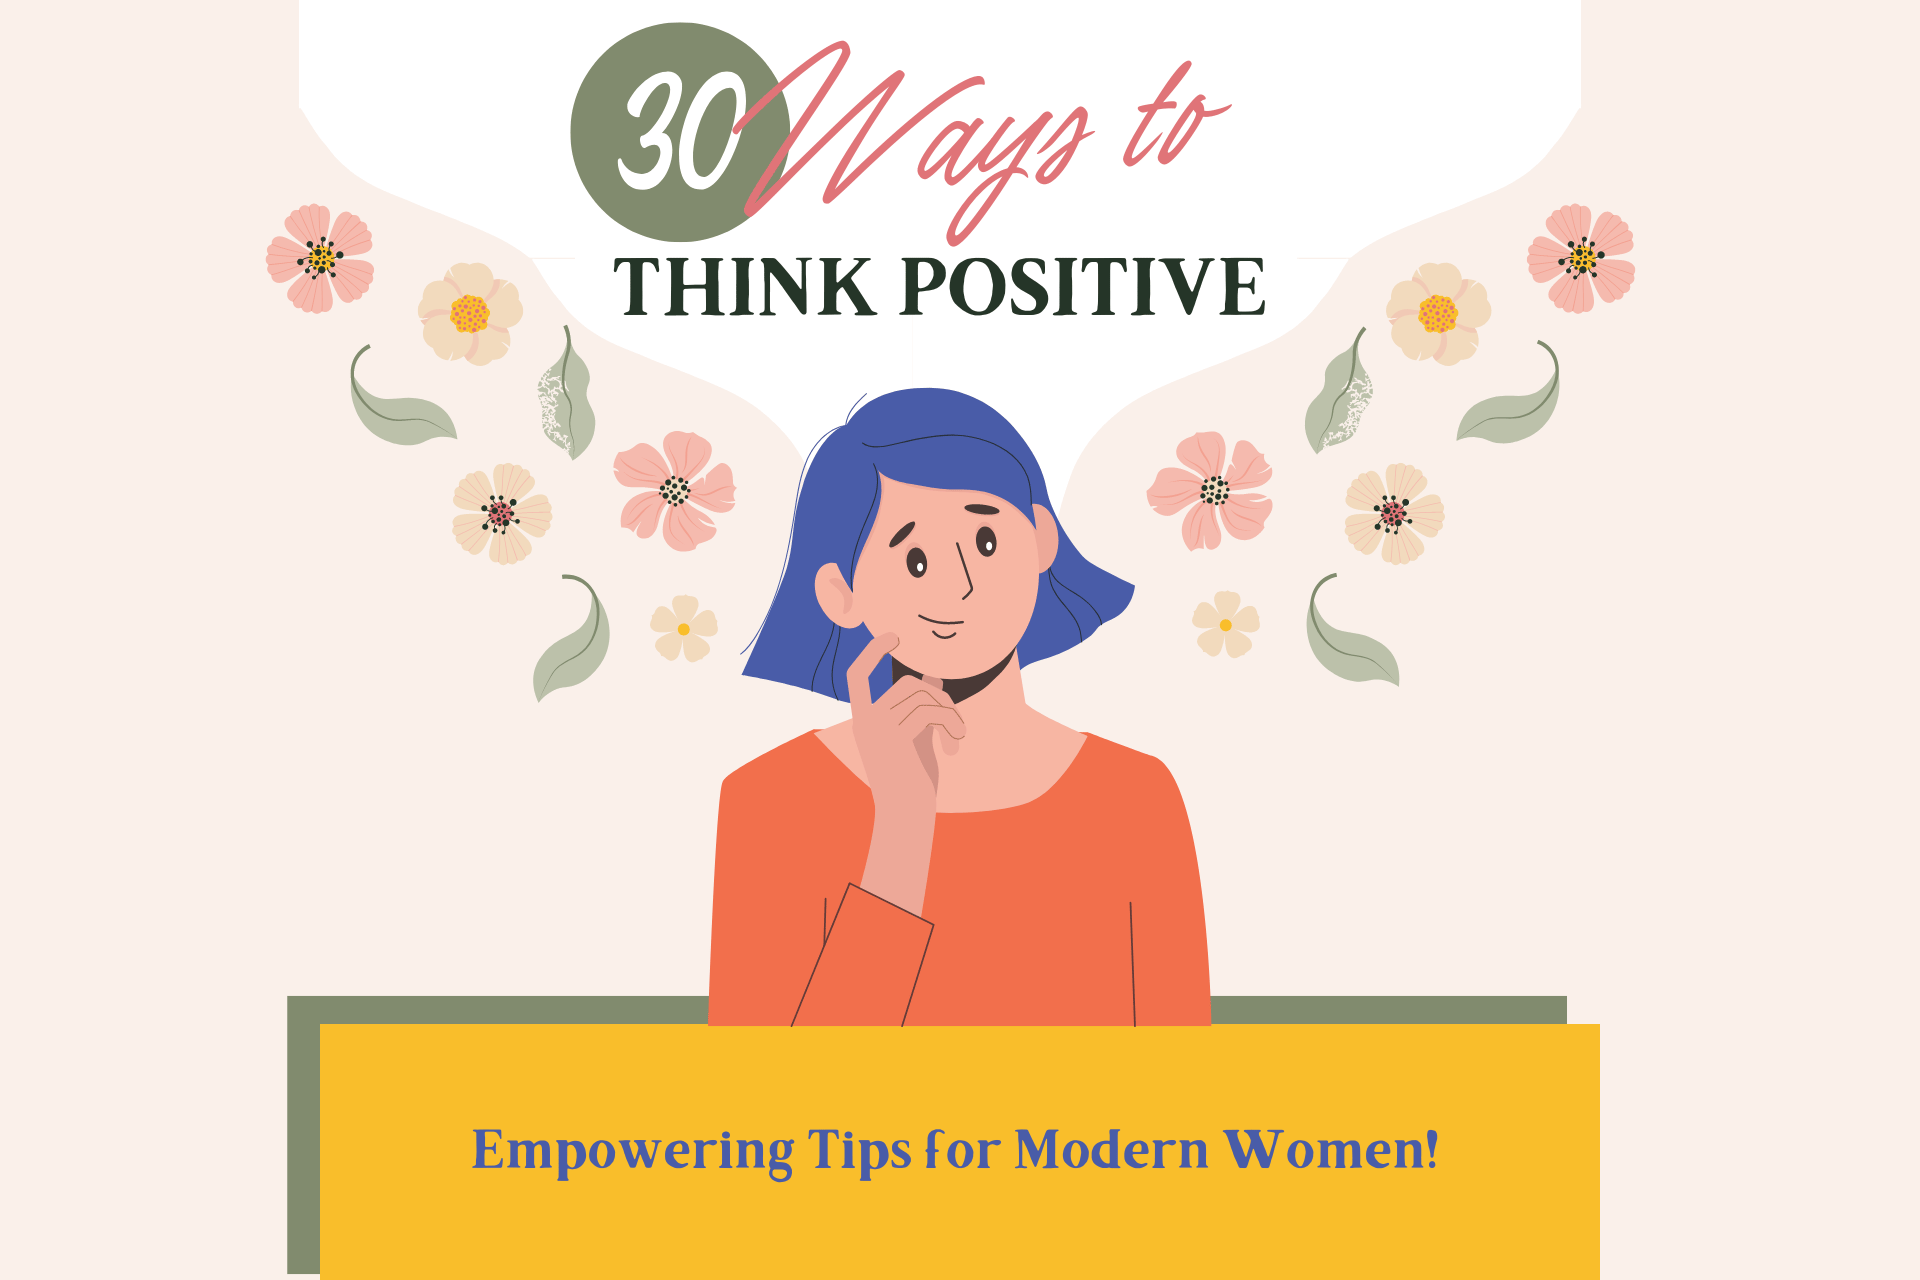 30 ways to think positive